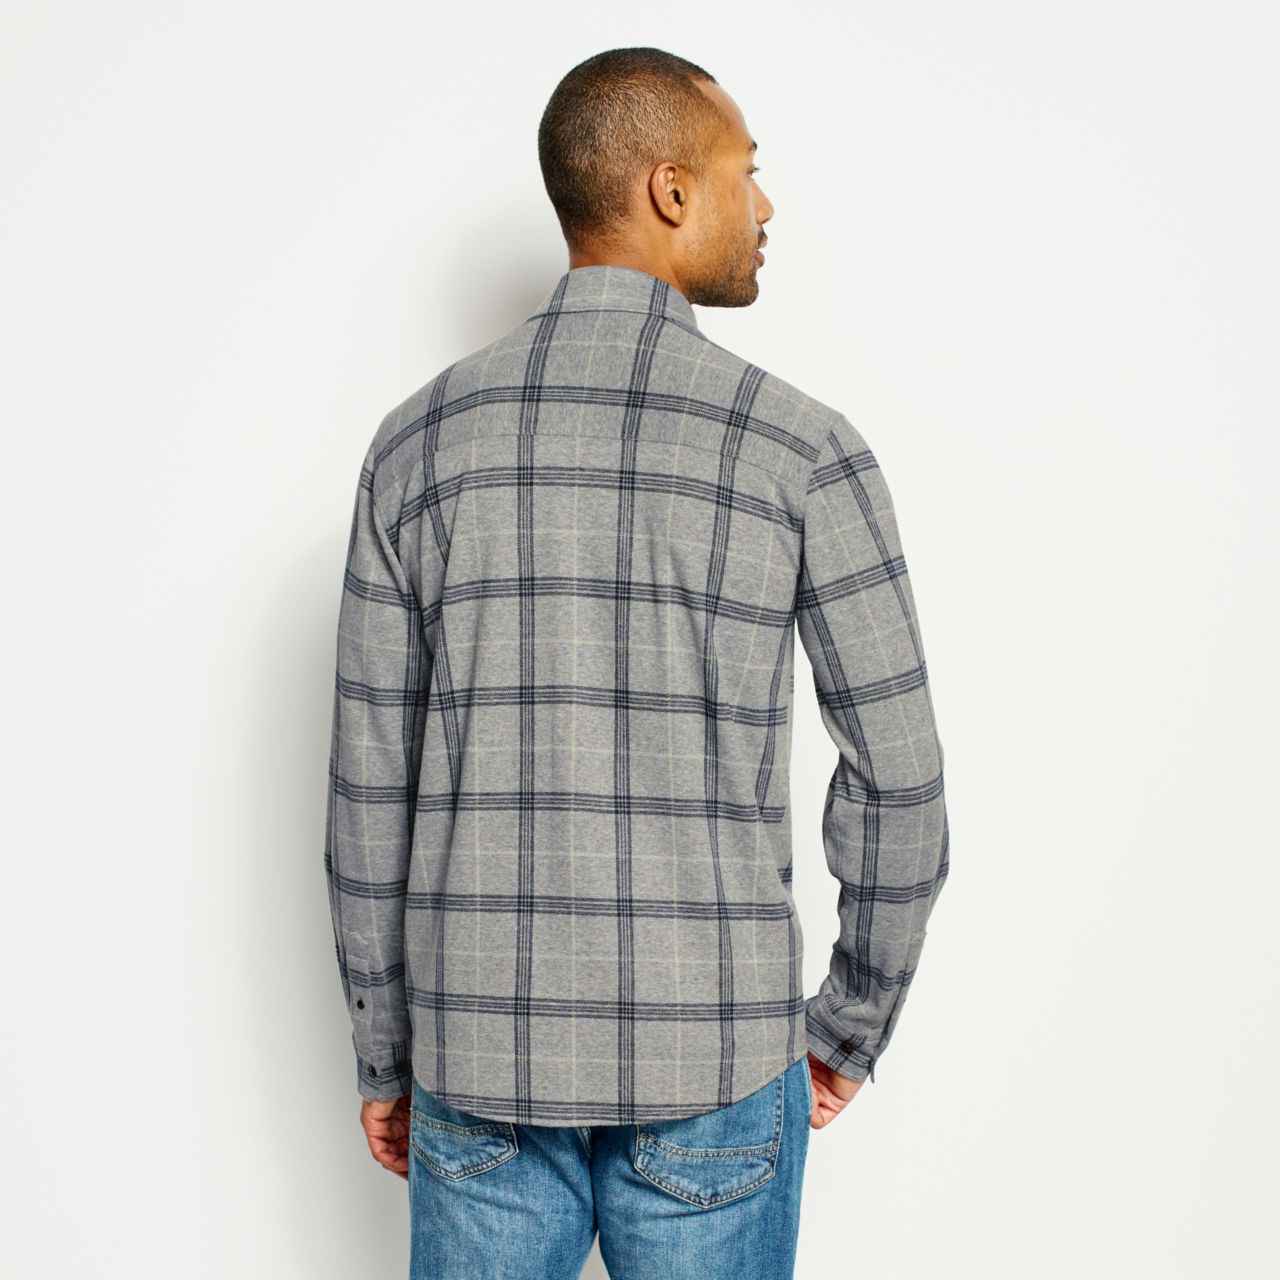 Snowy River Brushed Knit Long-Sleeved Shirt - NAVY PLAID image number 3